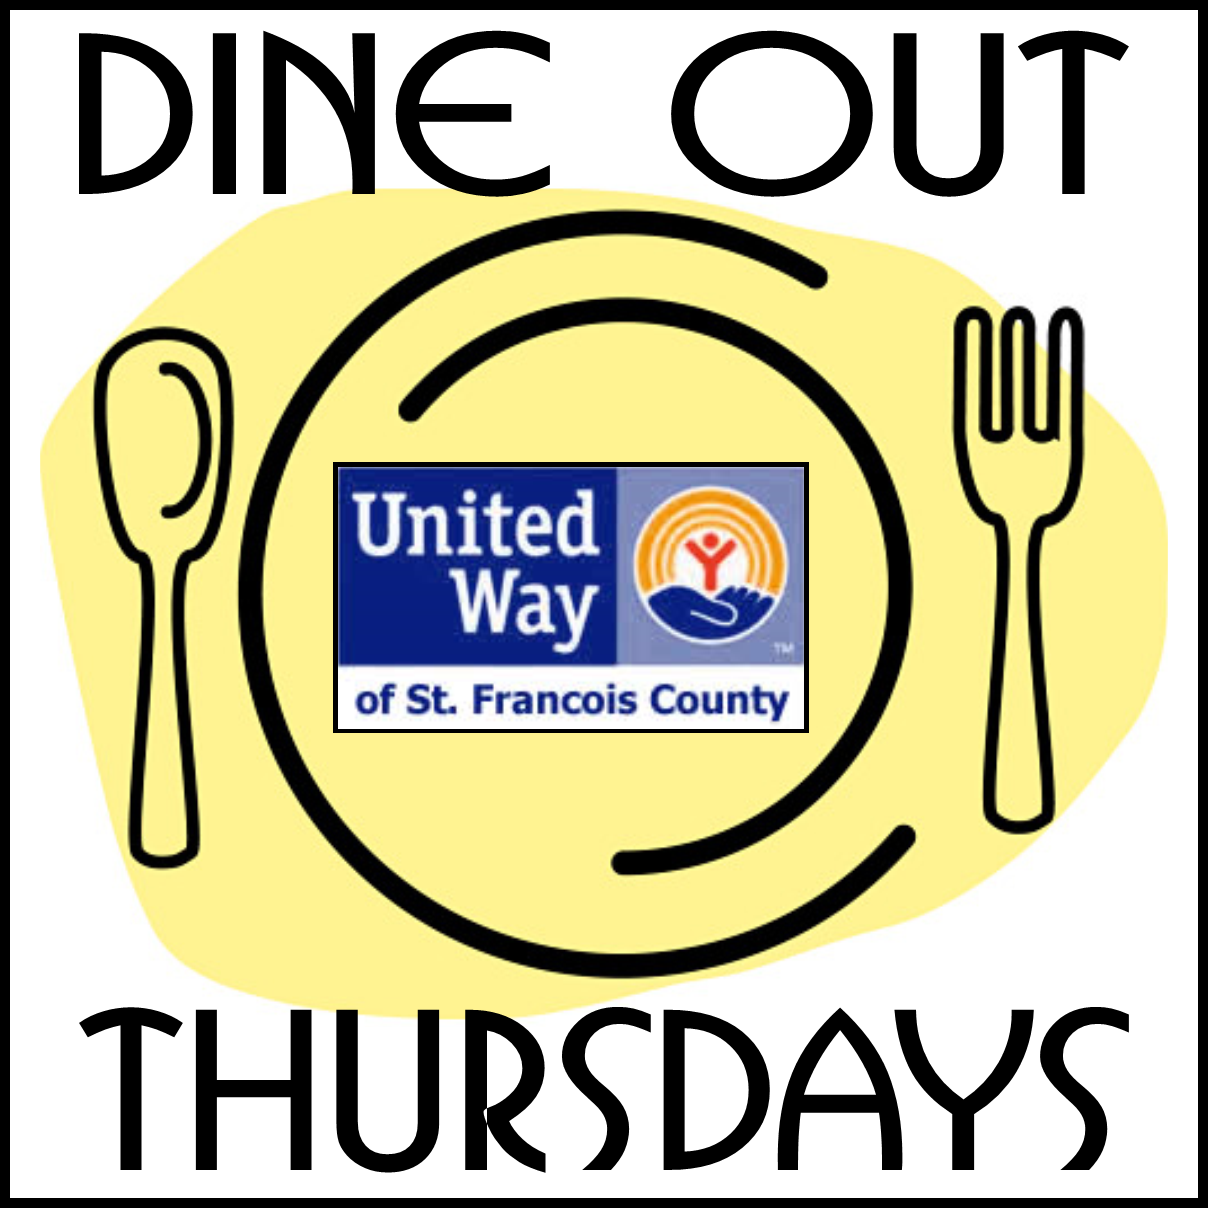 Dine Out Thursday for United Way at El Tapatio (Farmington) or Hubs Pub & Grill (Bonne Terre)